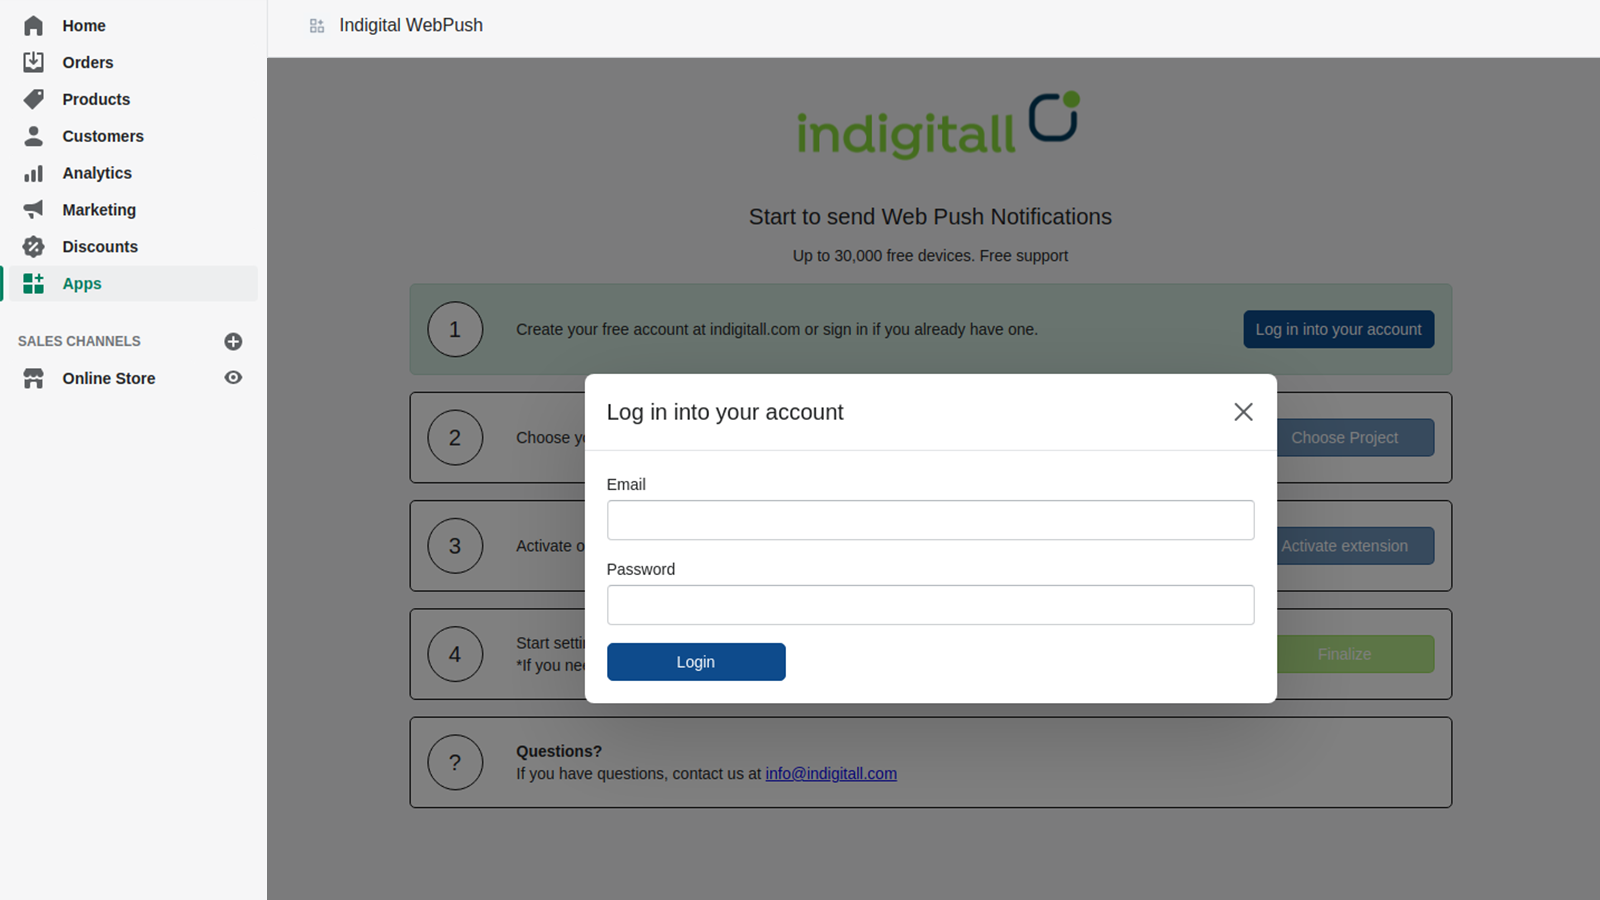 Login with your Indigitall account.